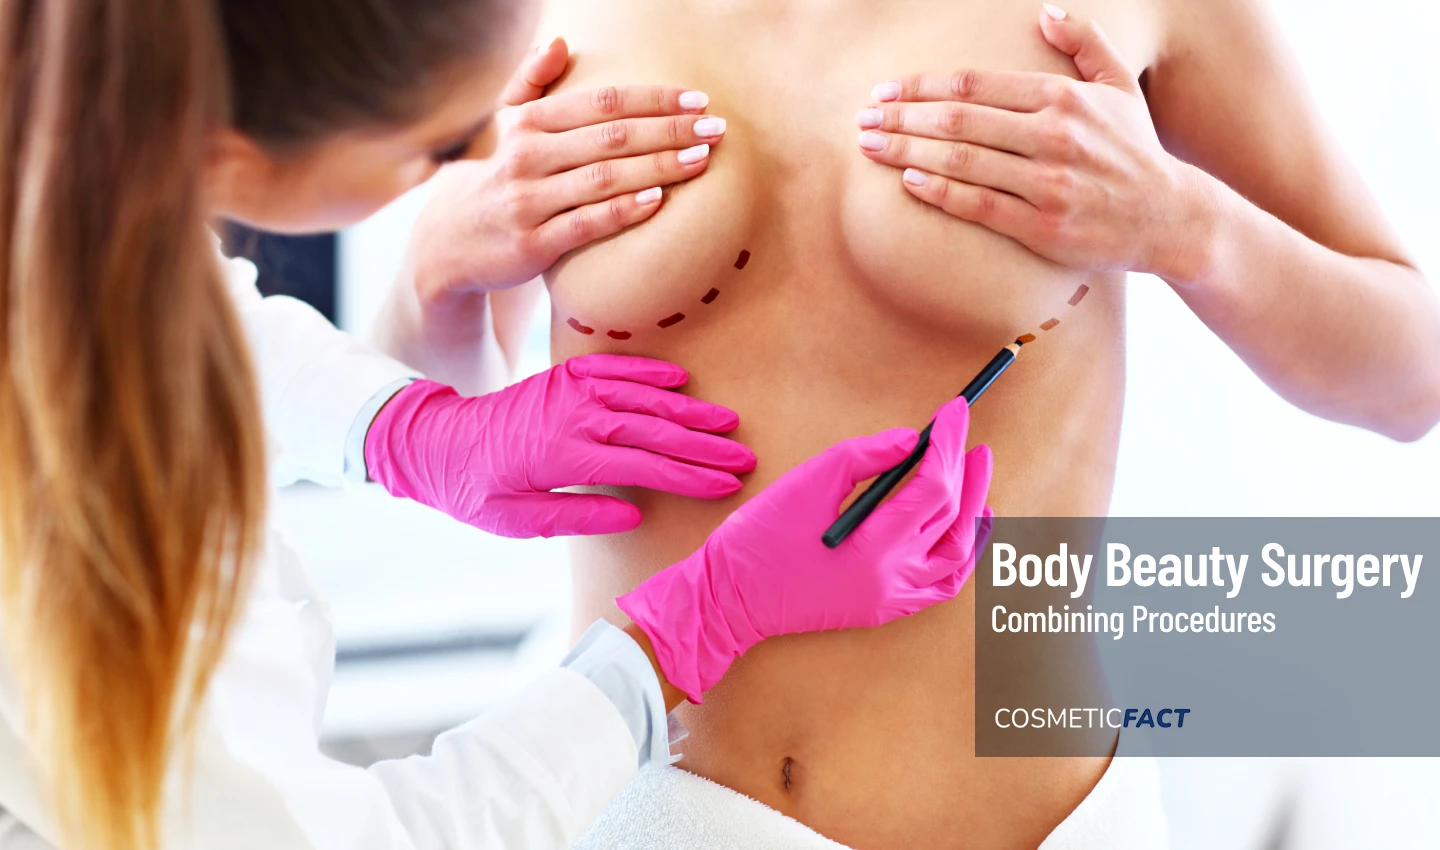 Image of a woman standing while a doctor makes surgical lines on her body, representing the importance of managing expectations when combining multiple body cosmetic surgery procedures.